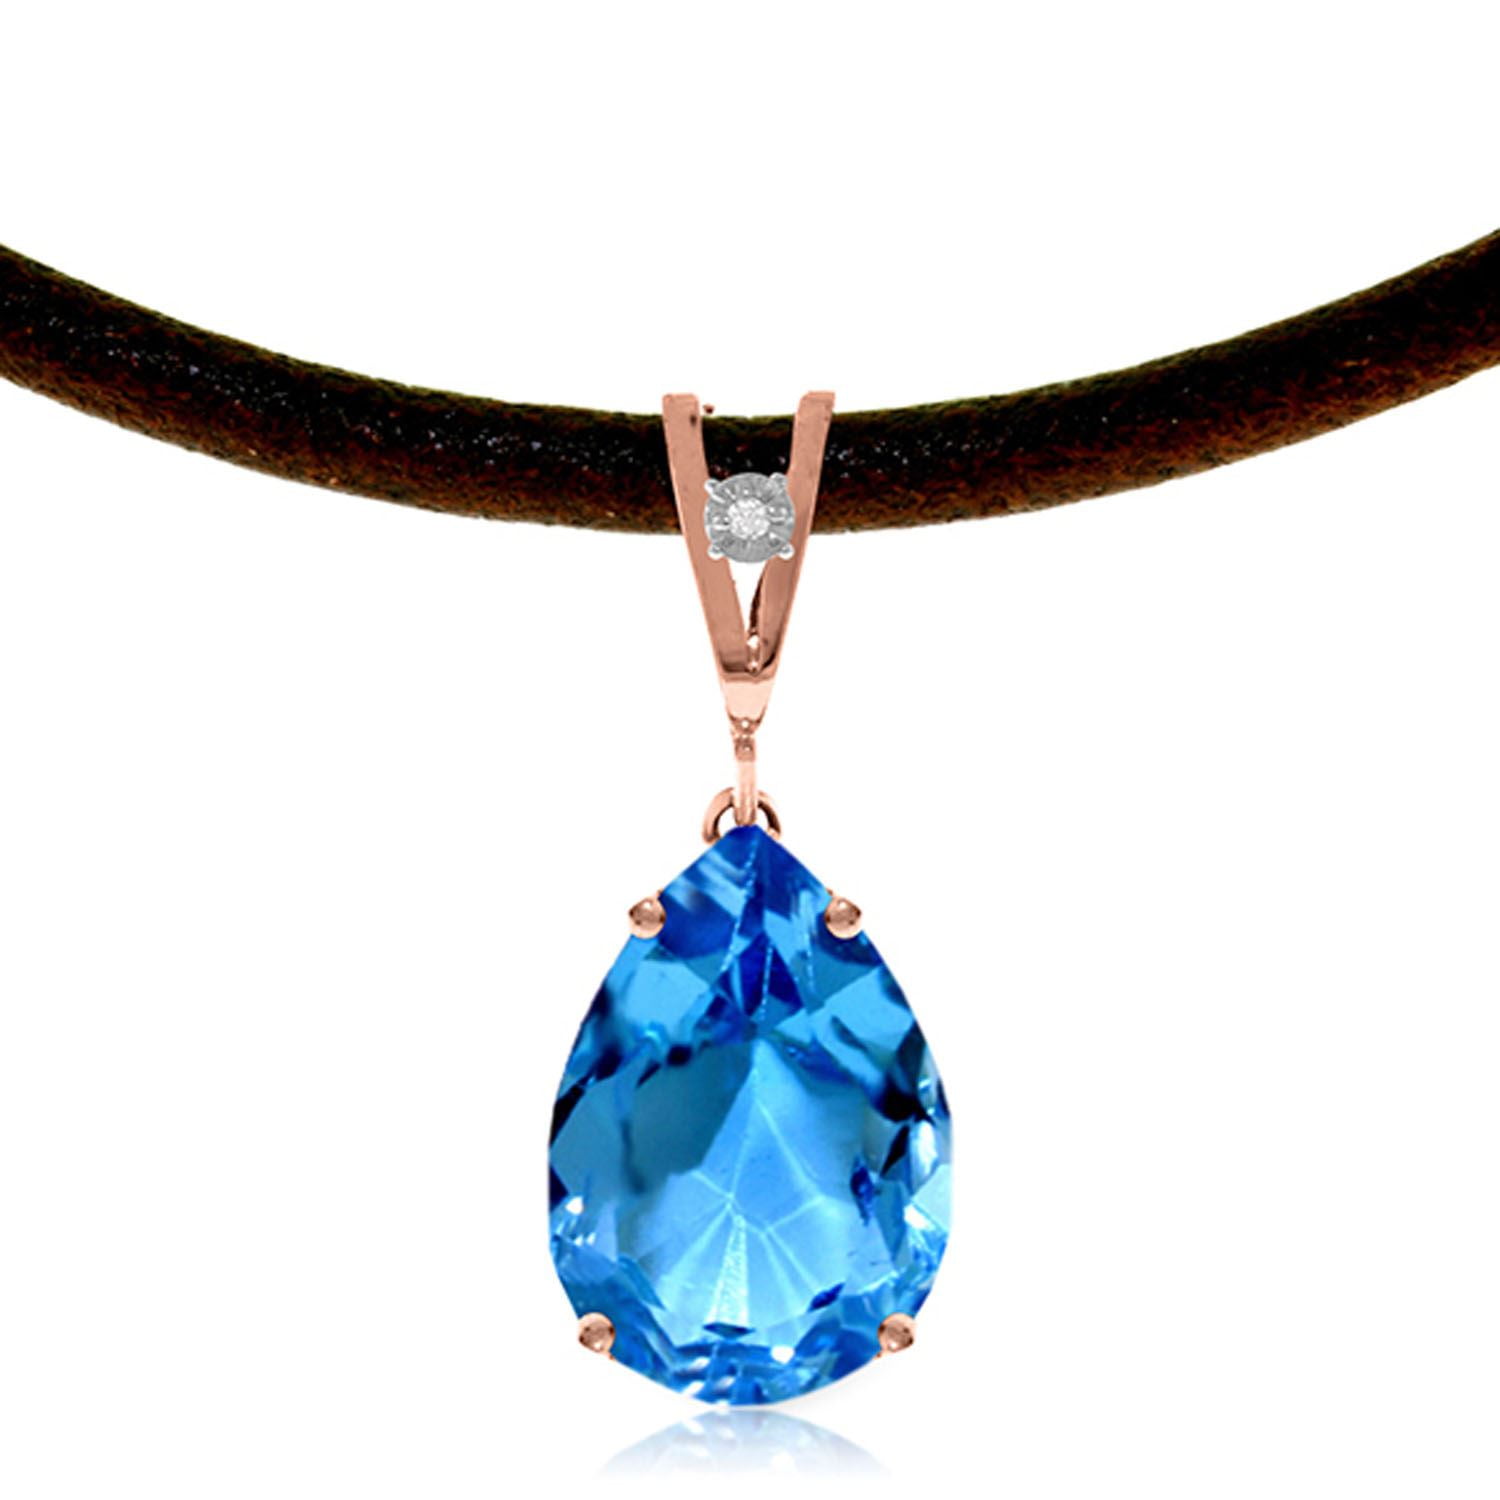 ALARRI 14K Solid Rose Gold & Leather Necklace w/ Diamond & Blue Topaz with 22 Inch Chain Length